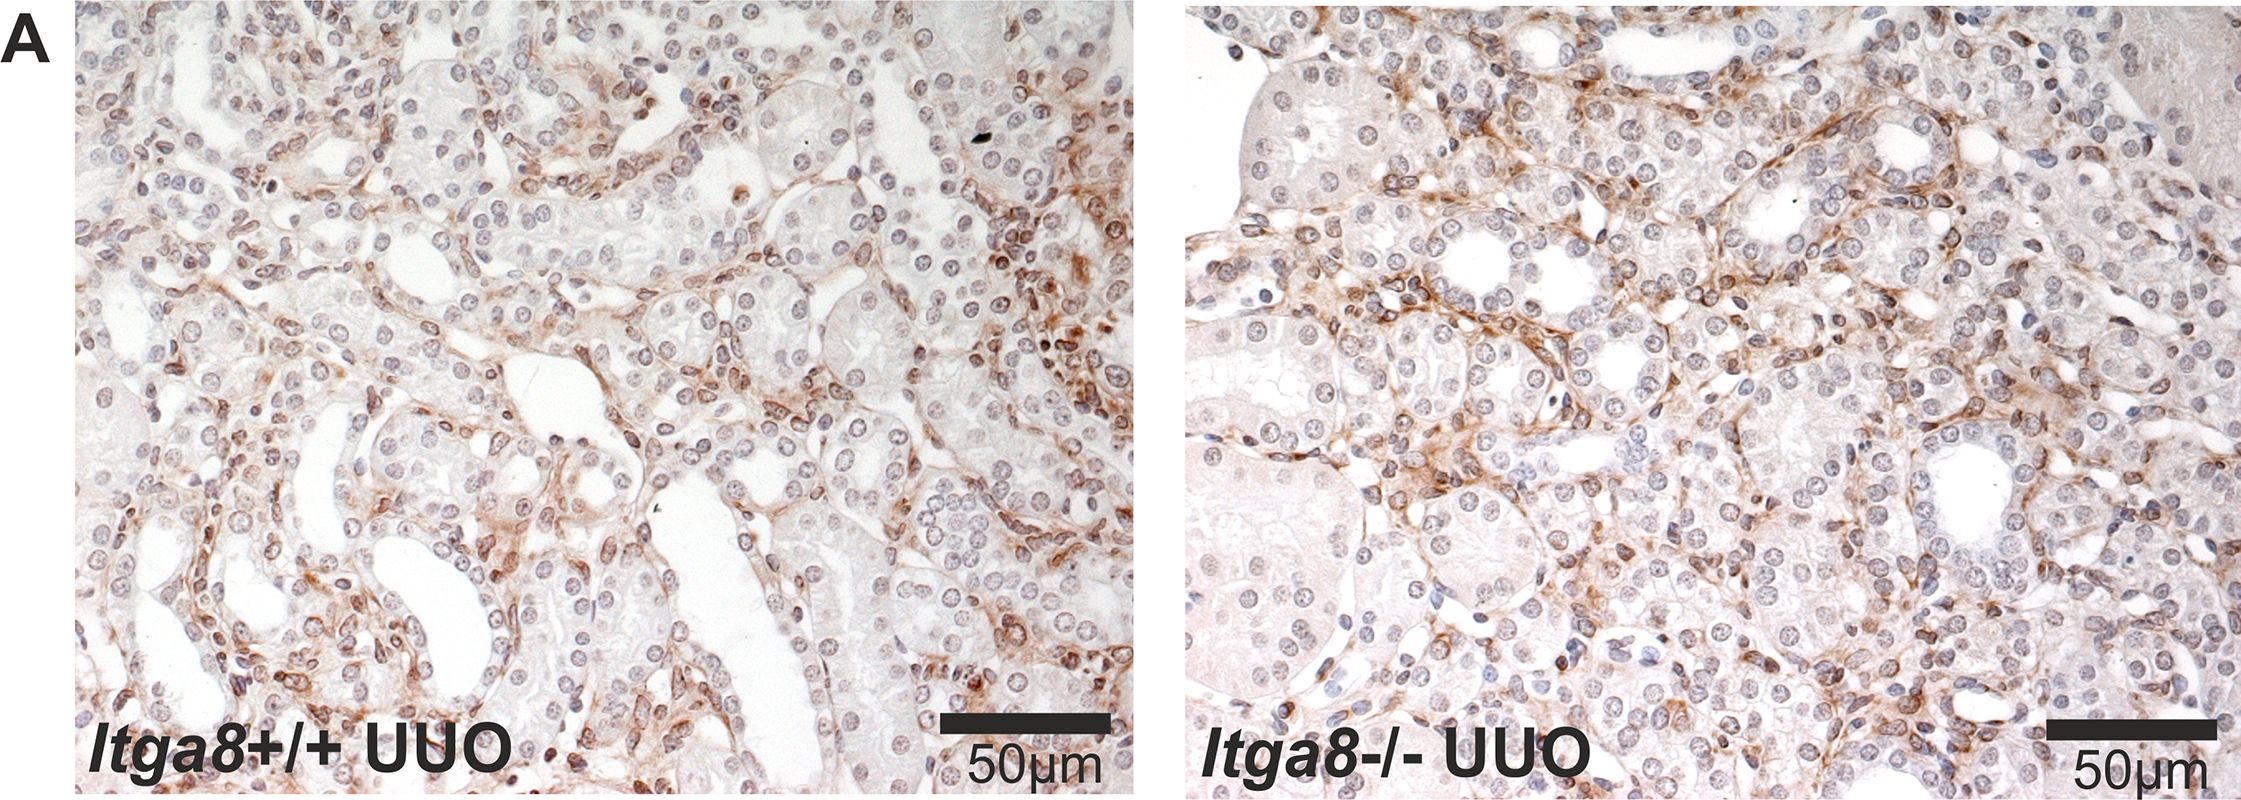 Alpha8 Integrin (Itga8) Signalling Attenuates Chronic Renal Interstitial Fibrosis by Reducing Fibroblast Activation, Not by Interfering with Regulation of Cell Turnover.